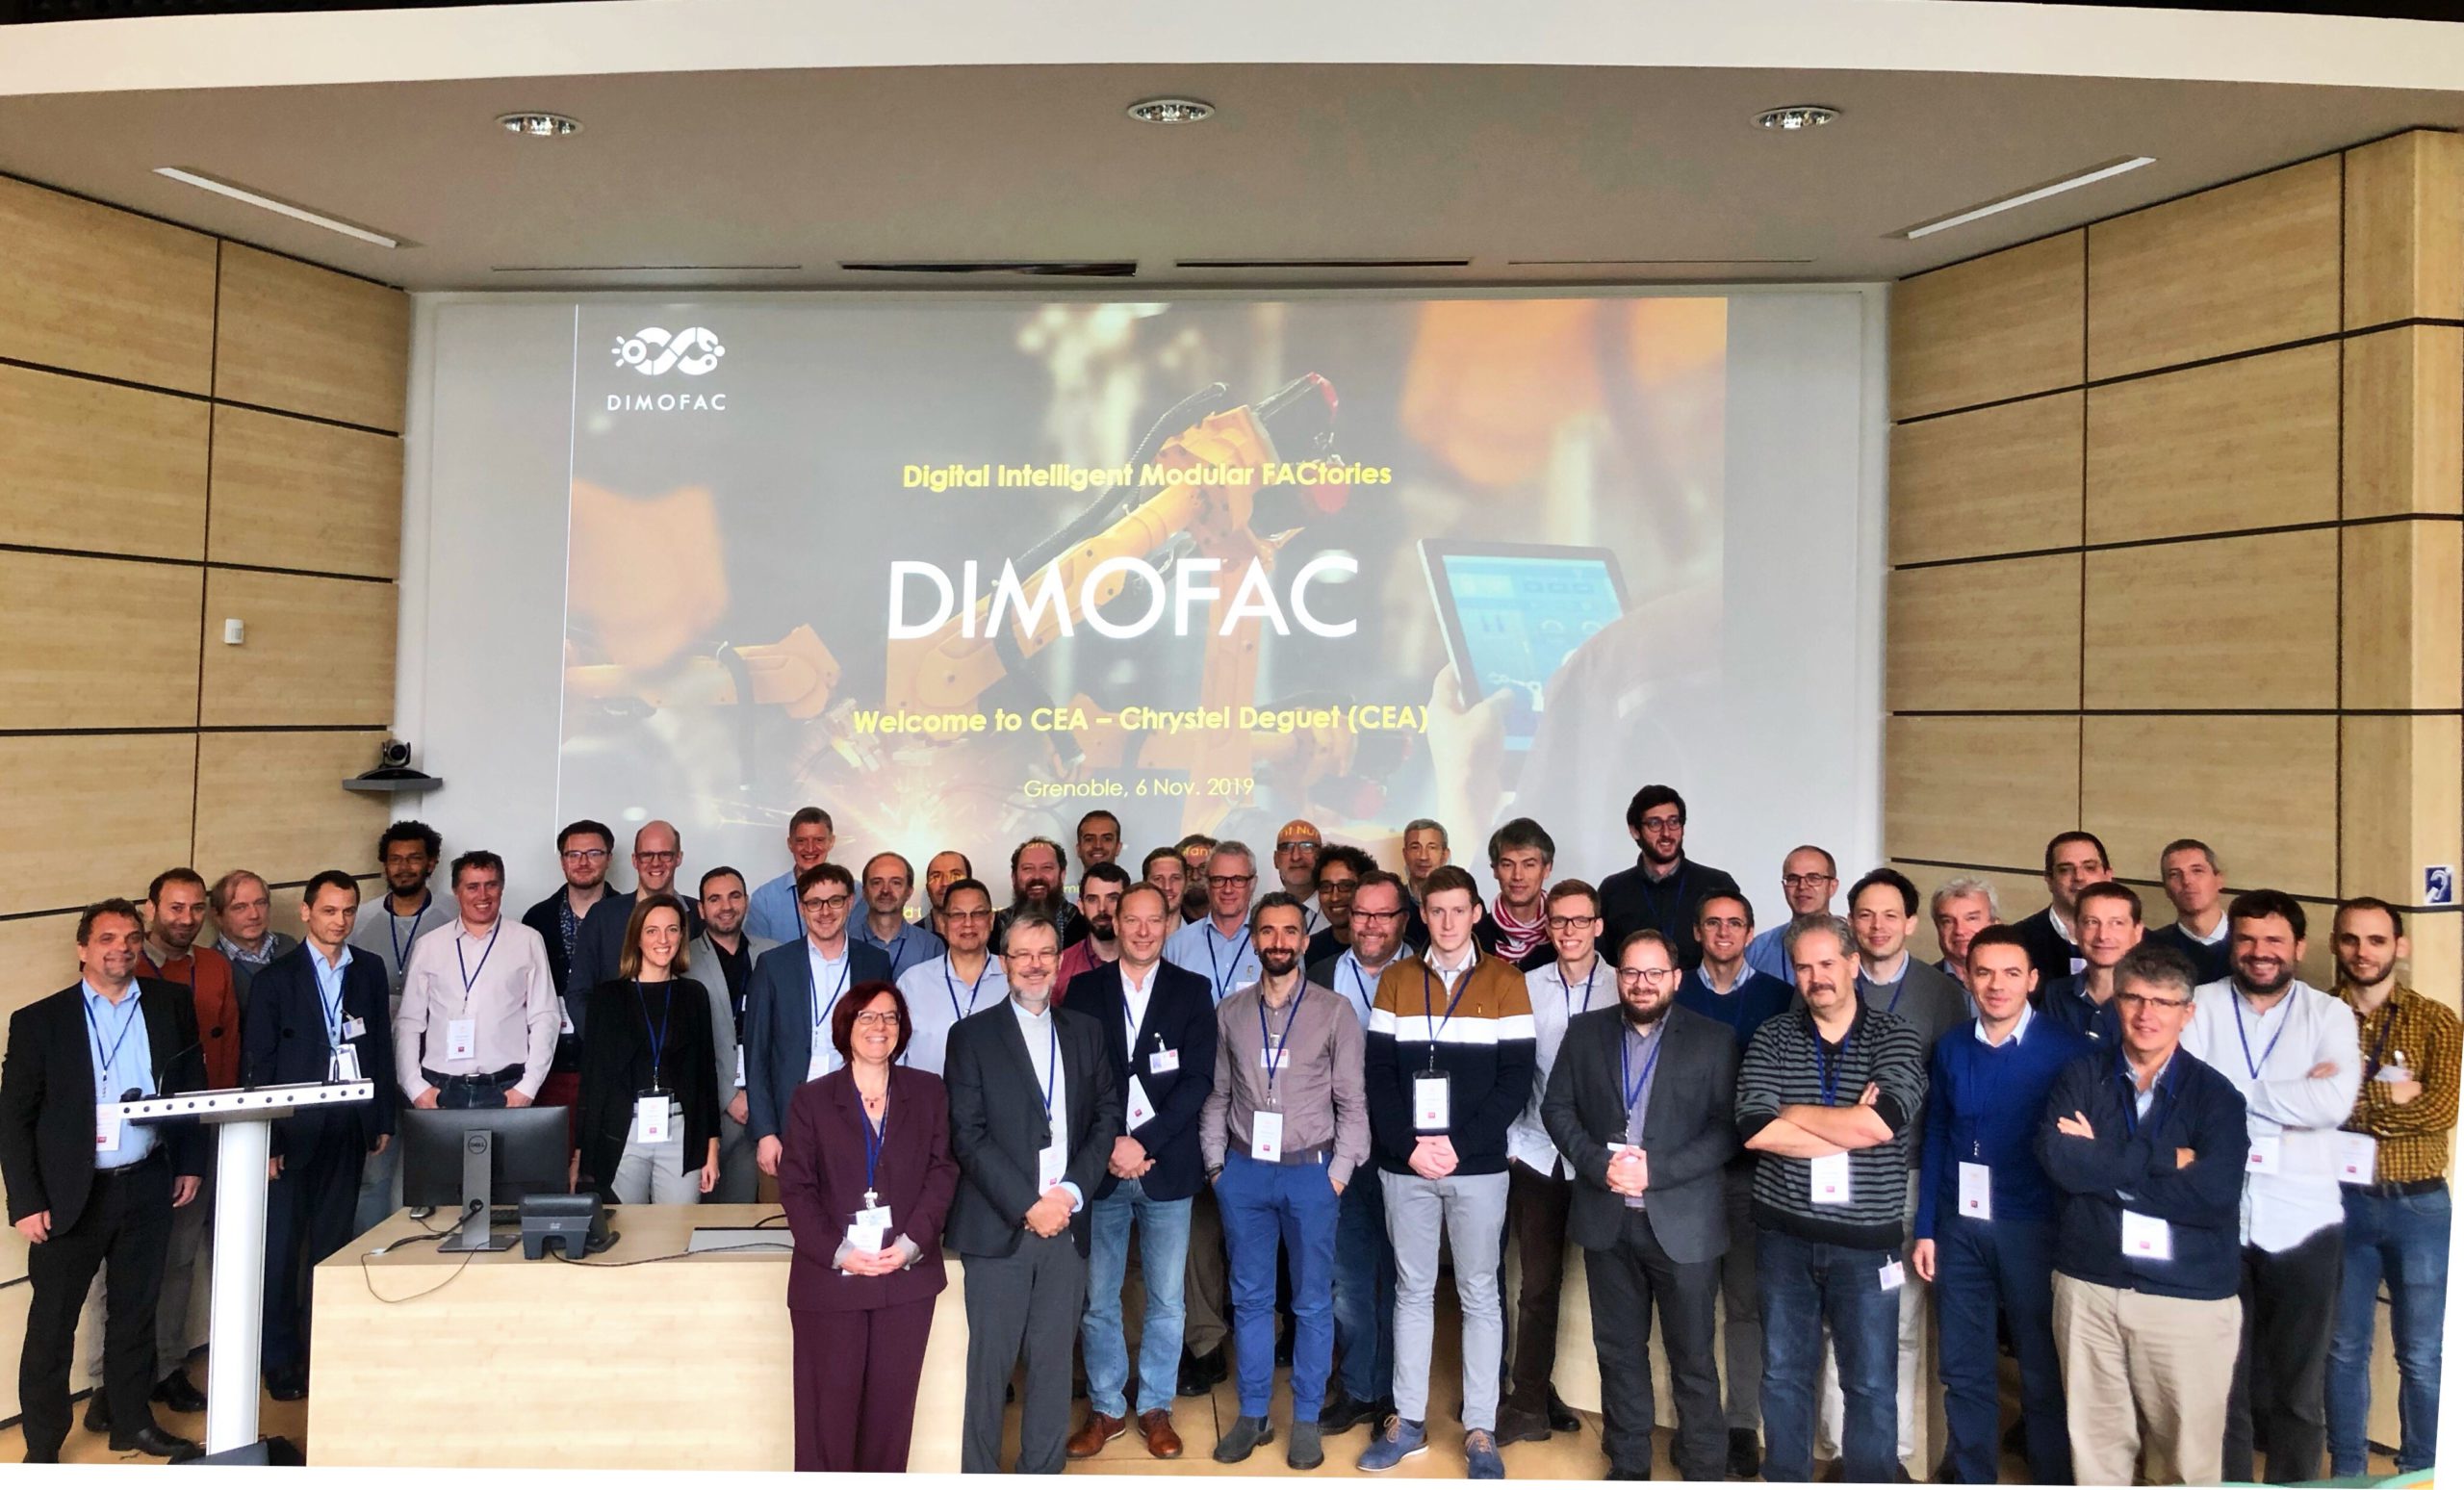 The Swiss Smart Factory is partner of the EU DIMOFAC H2020 project